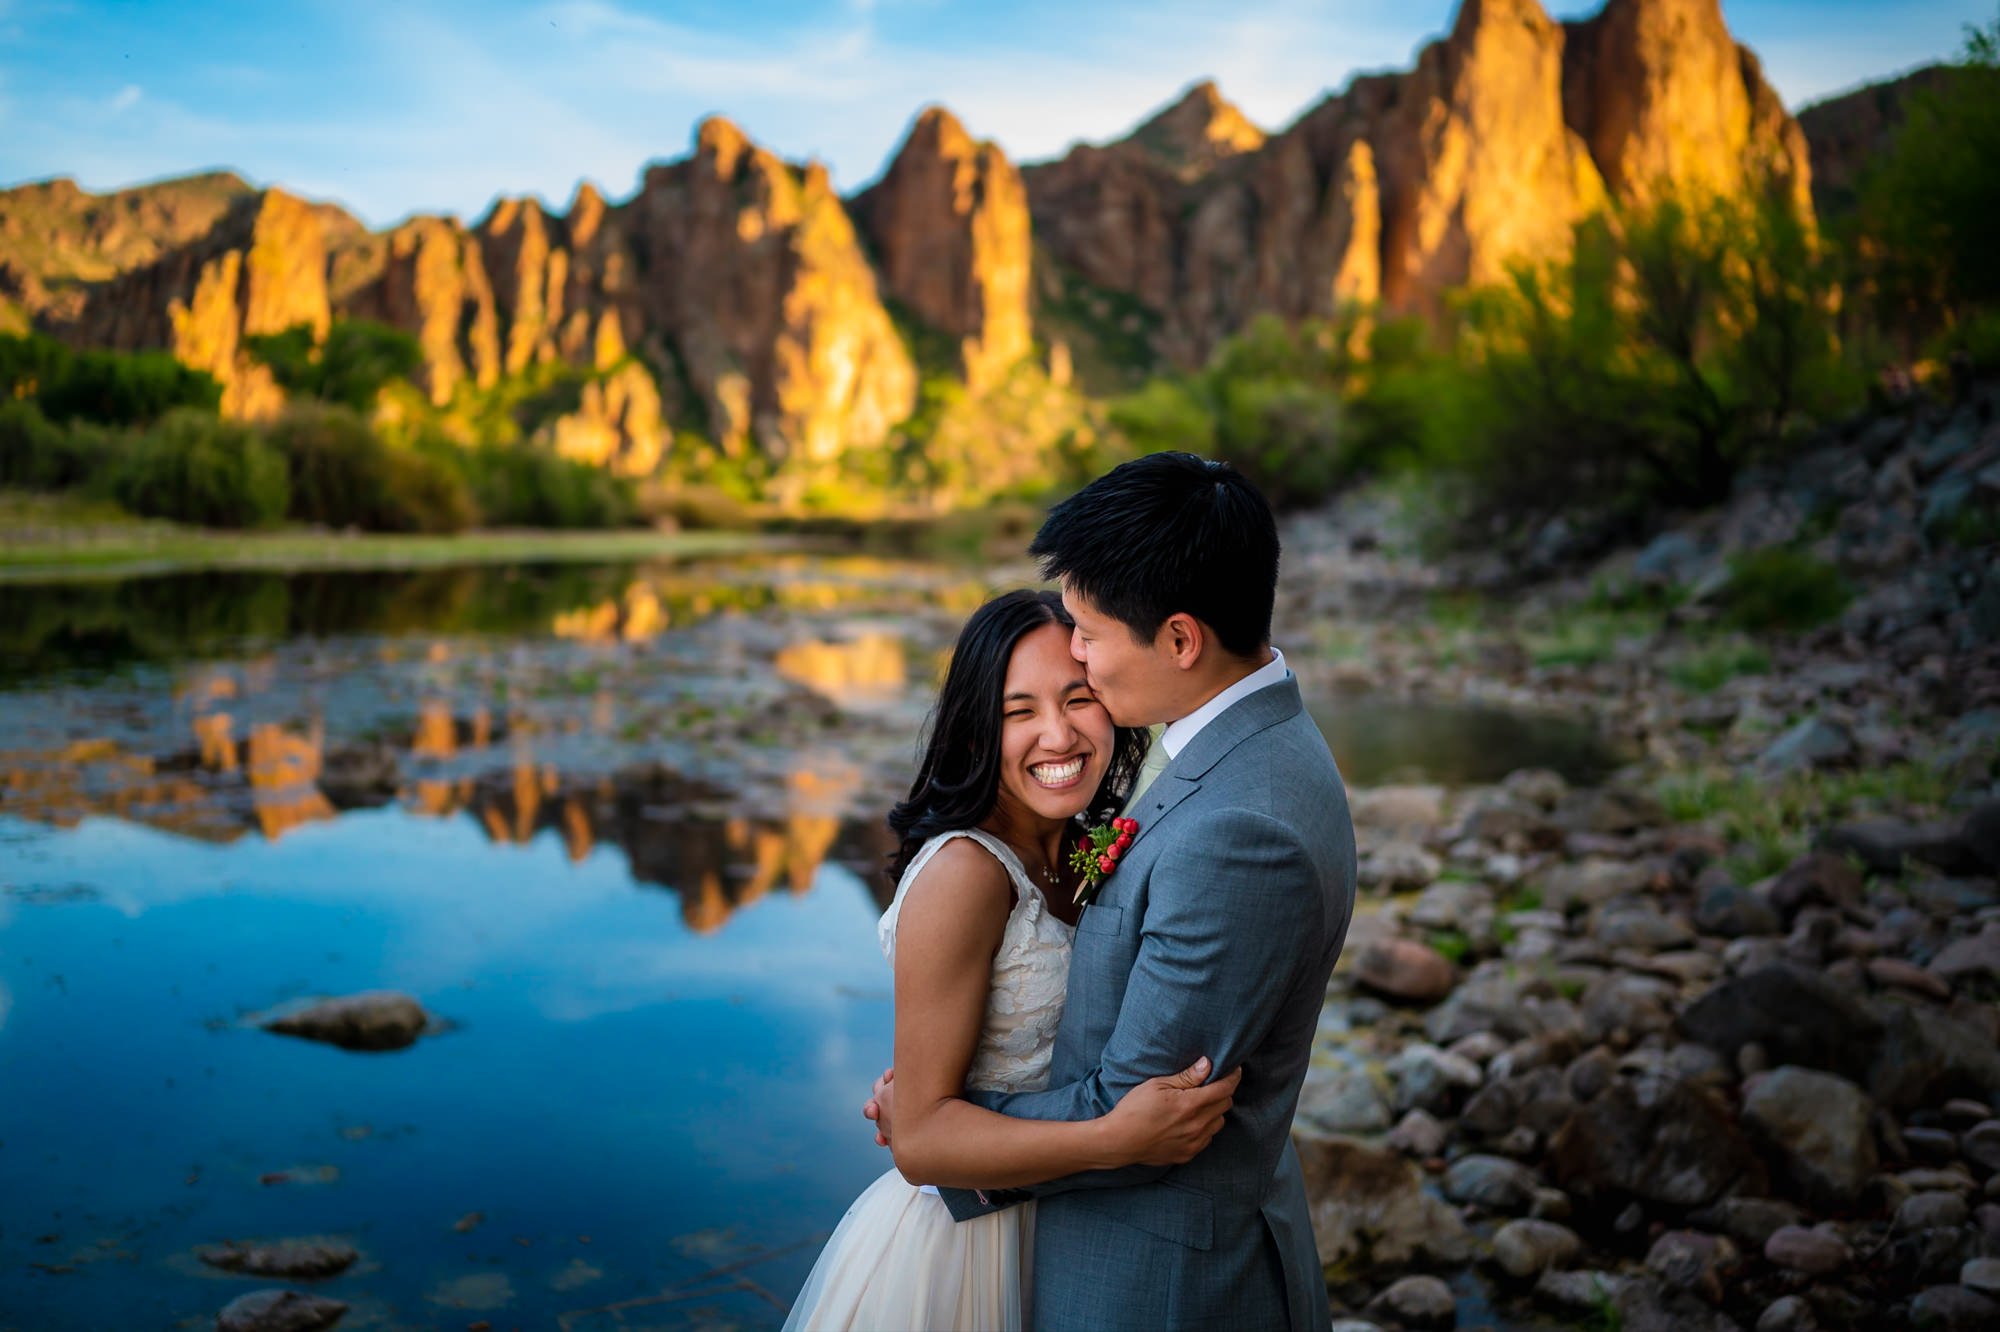 Saguaro Lake Guest Ranch The Perfect Location for a Laid-Back Fun-Filled Wedding. The best documentary wedding photographer Mantas Kubilinskas-41.jpg